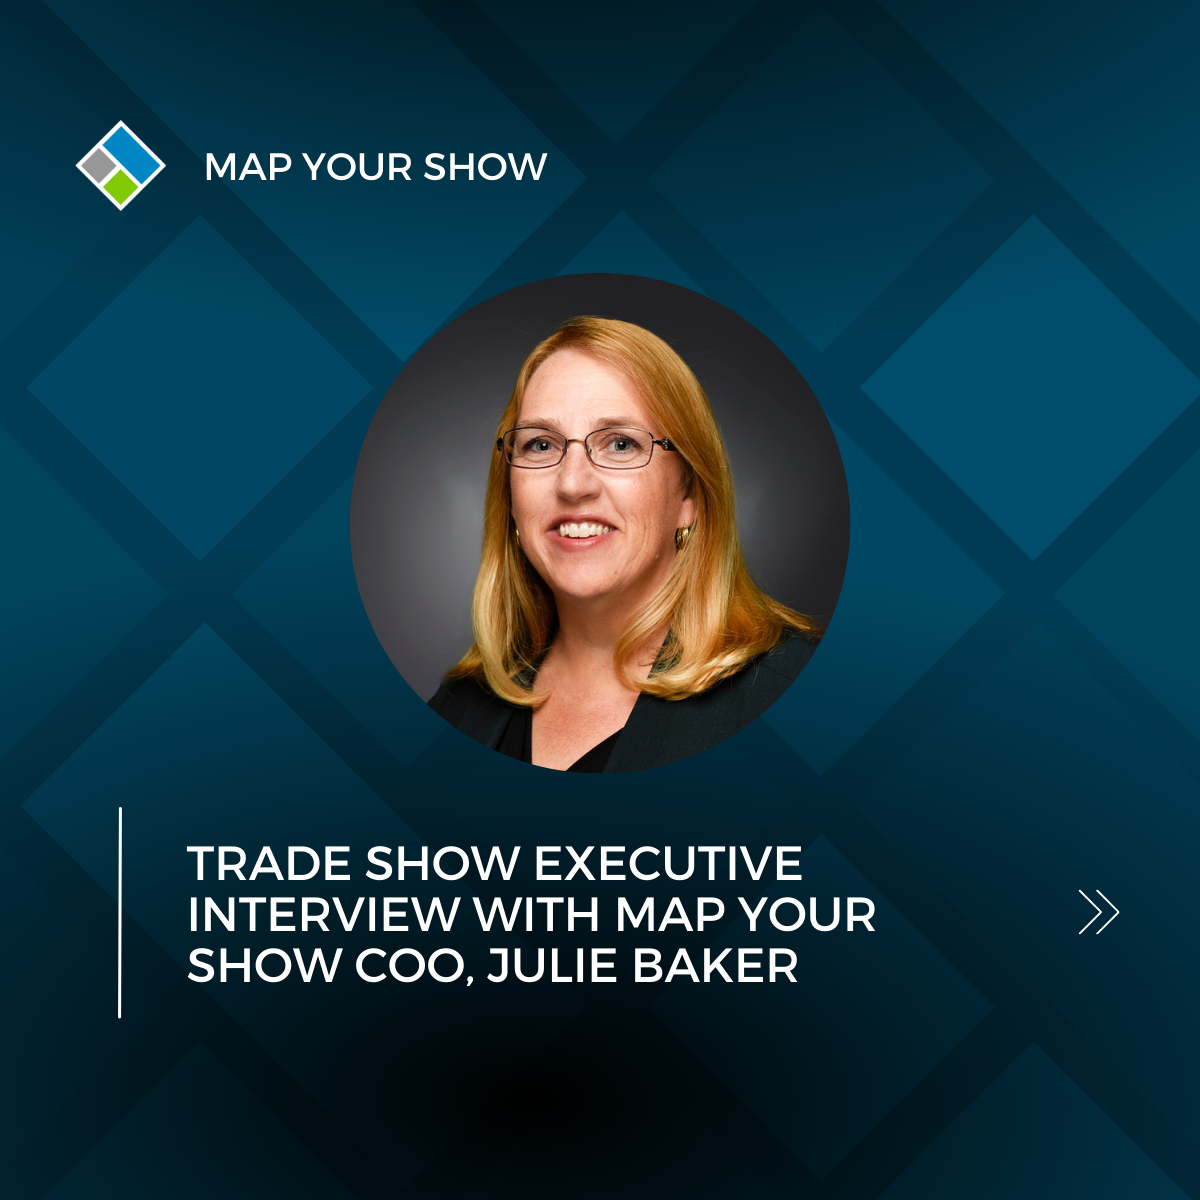 Trade Show Executive Interview with Map Your Show COO, Julie Baker. Event Management Technology